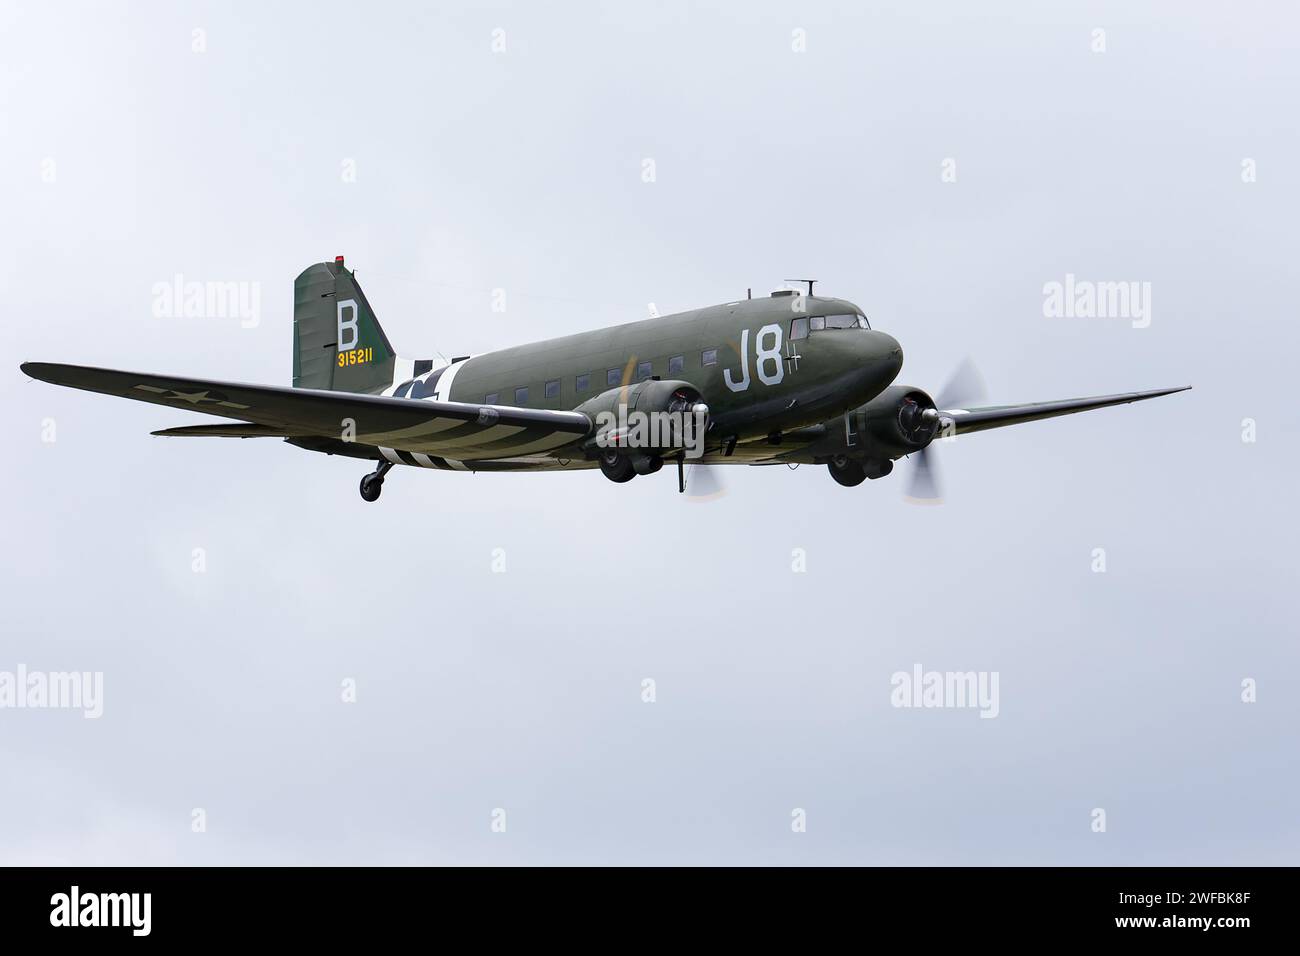 Douglas C-47 Skytrain (Dakota) aircraft painted in its original 94th Troop Carrier Squadron Normandy Invasion markings complete with D-Day stripes Stock Photo